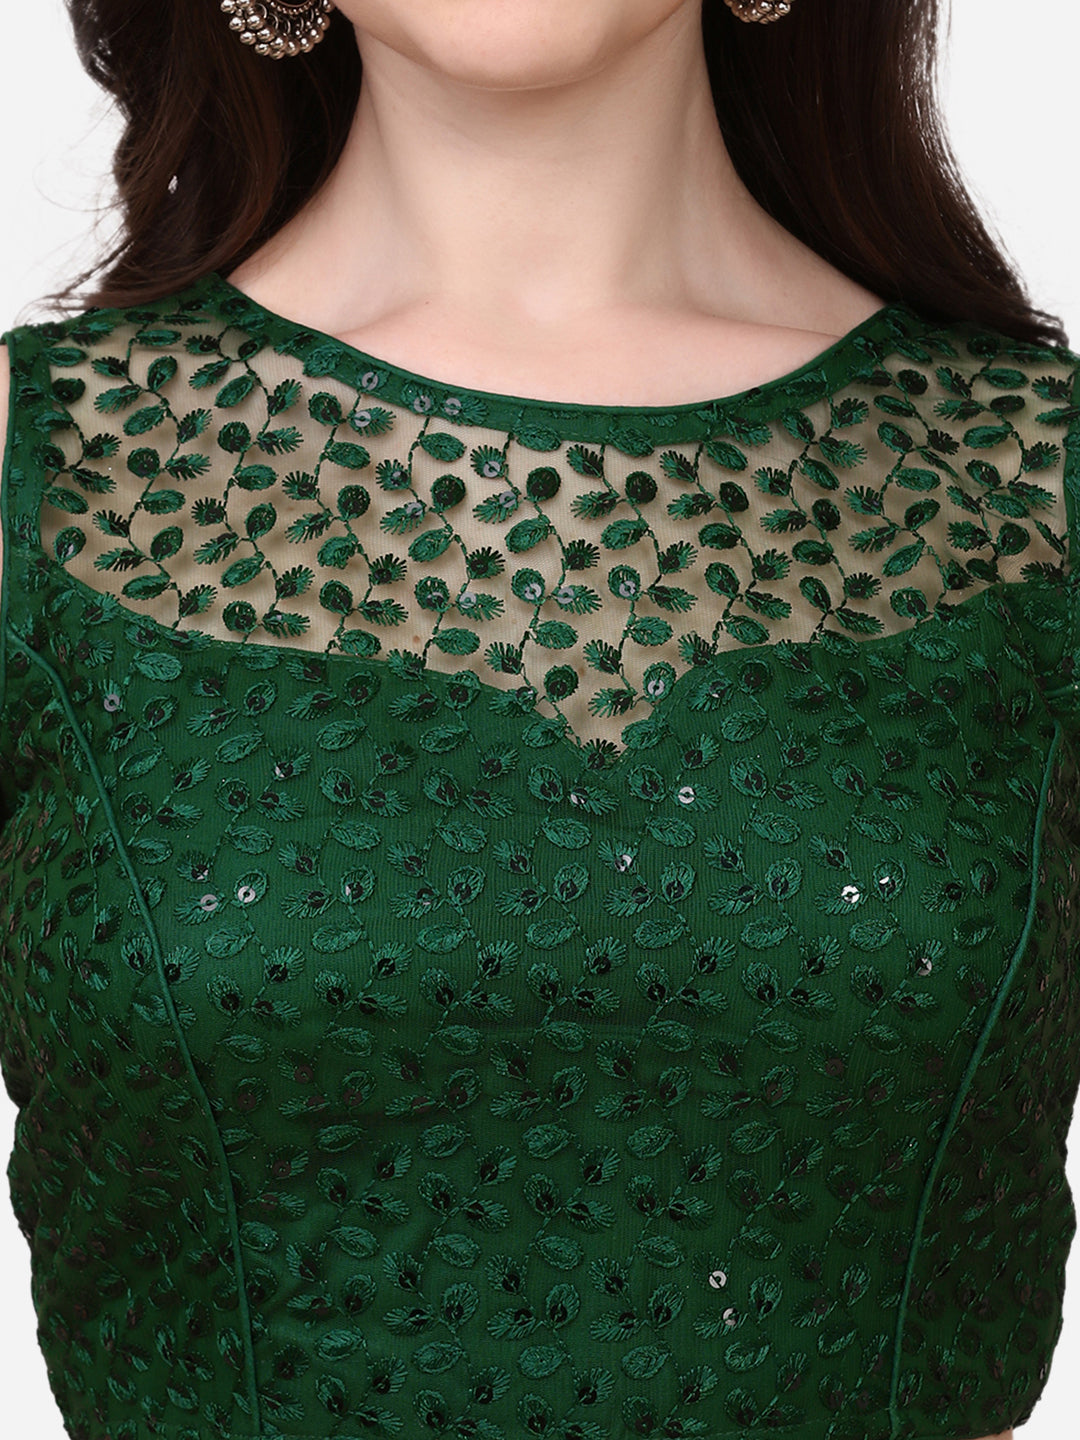 Exclusive Sequence & Embroidered Work Green Color Net Blouse